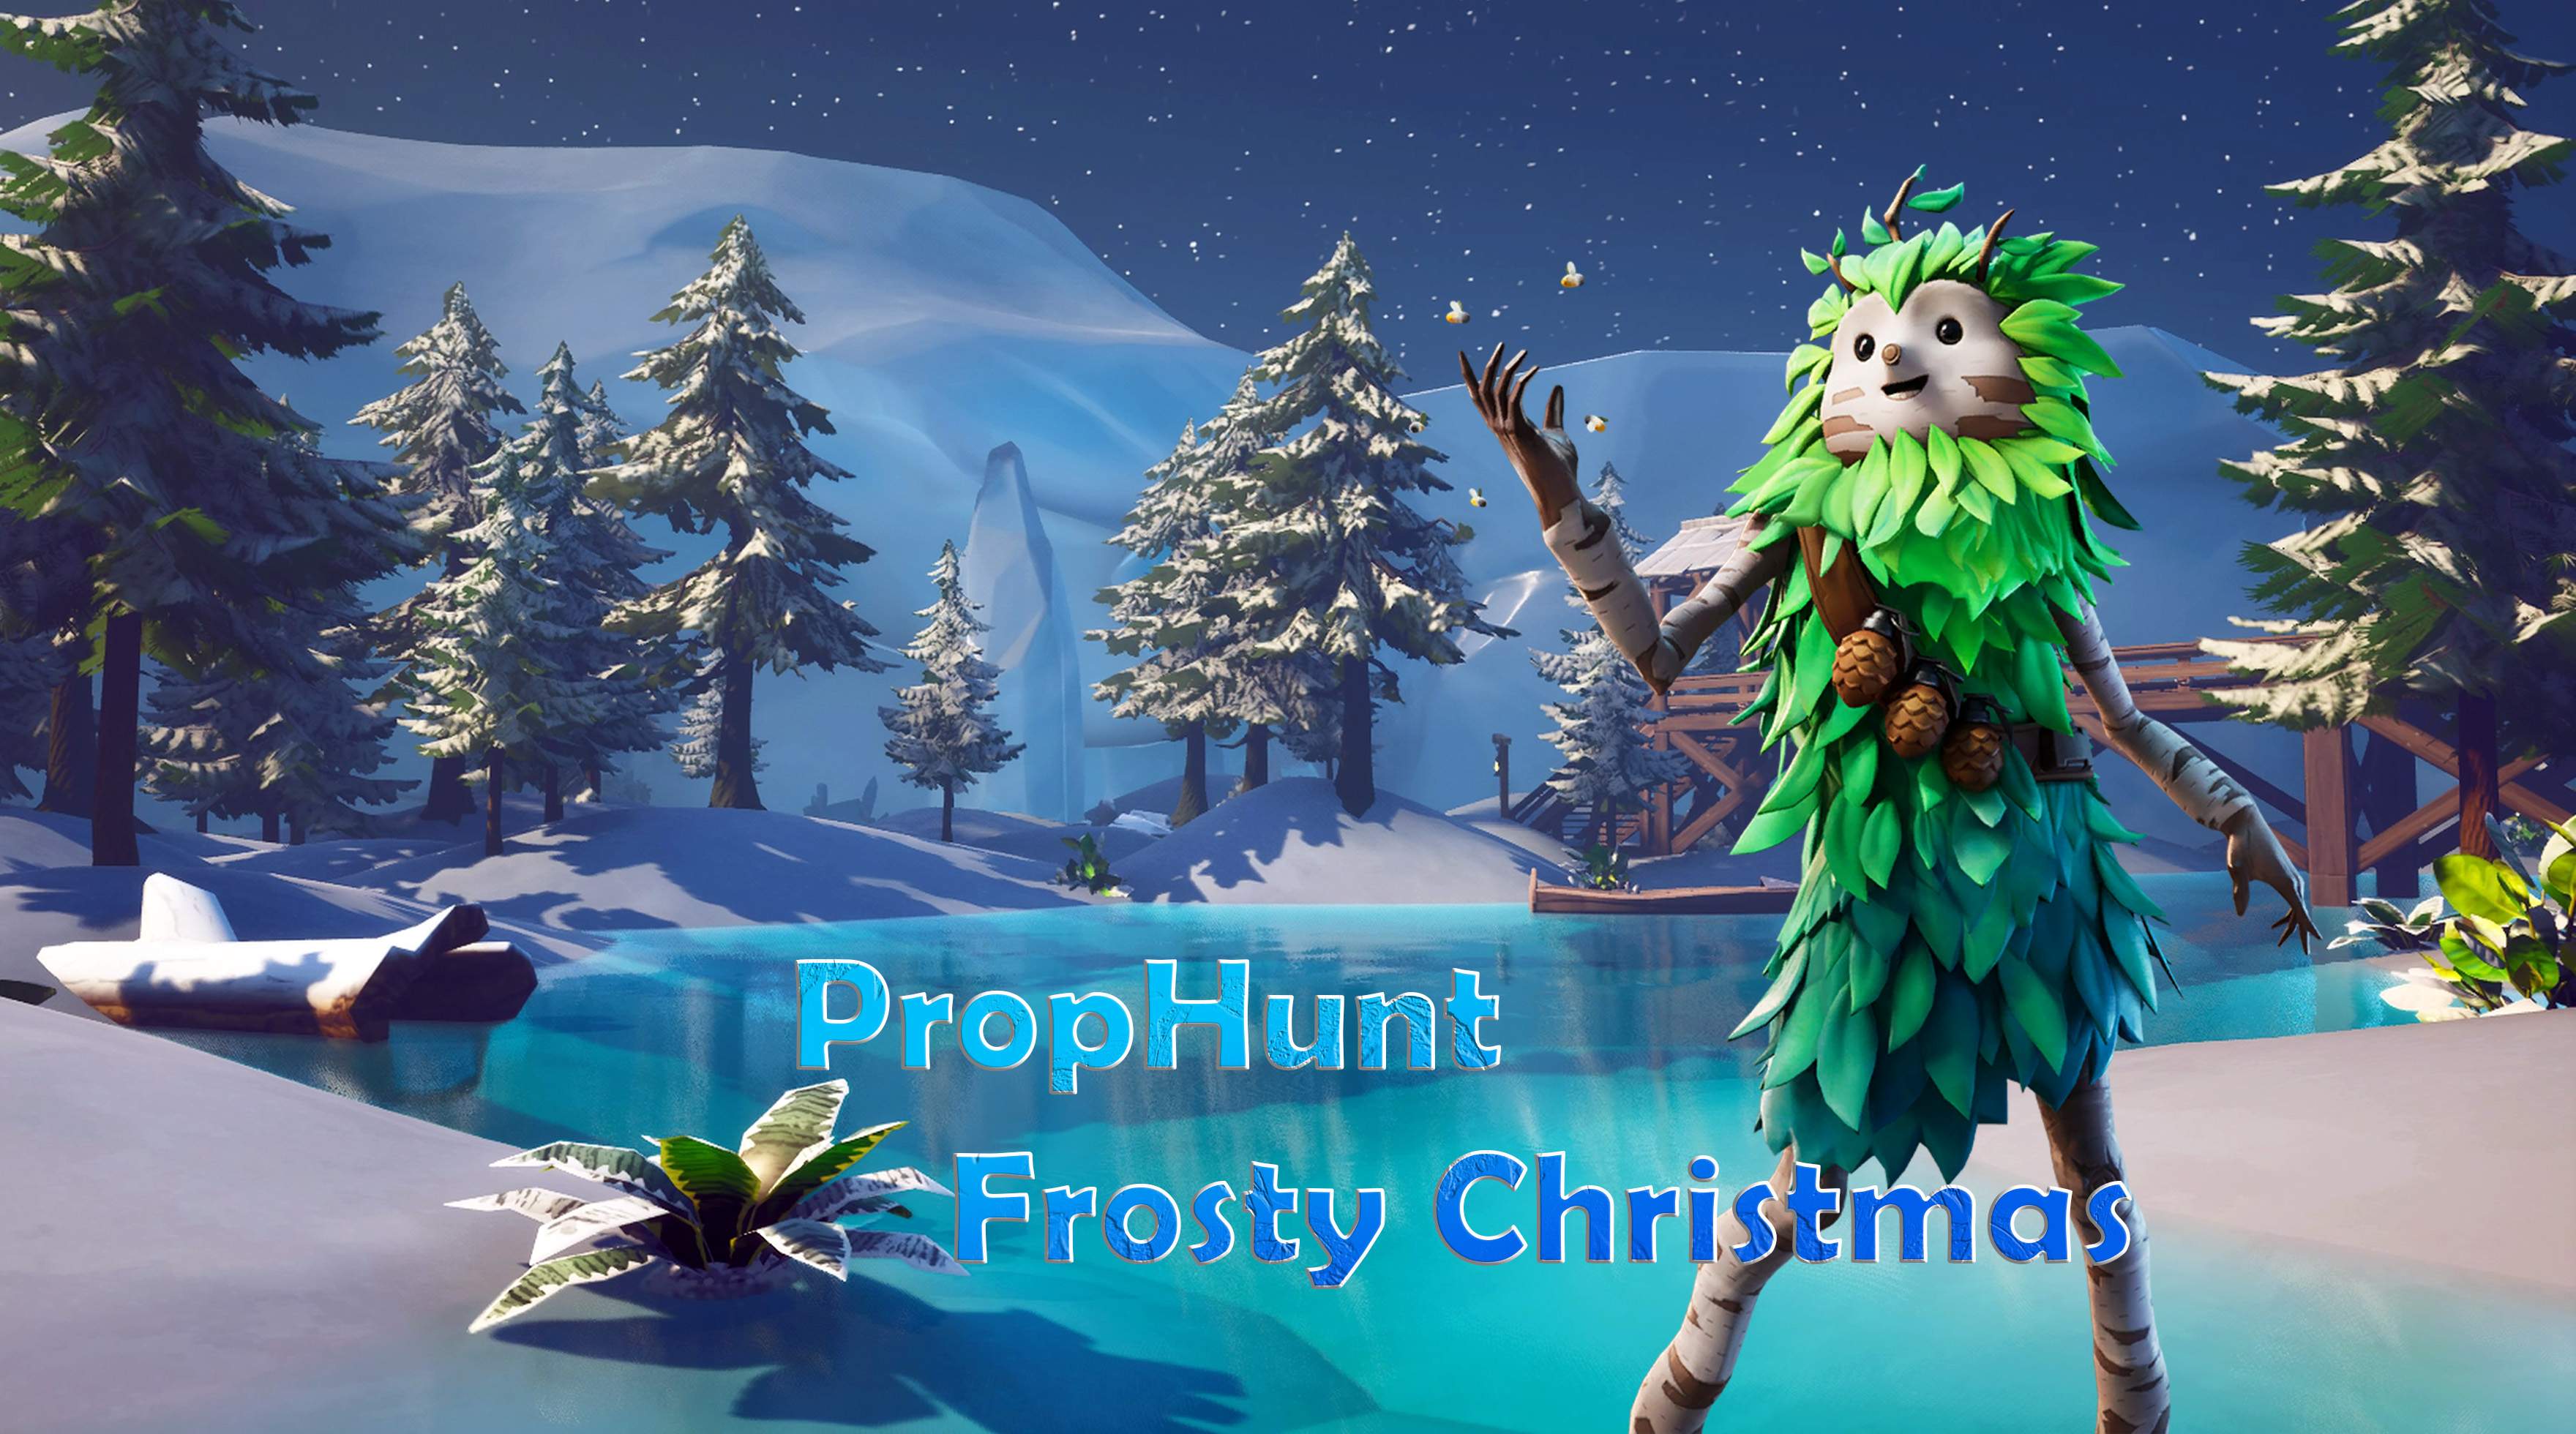 PROPHUNT - FROSTY CHRISTMAS